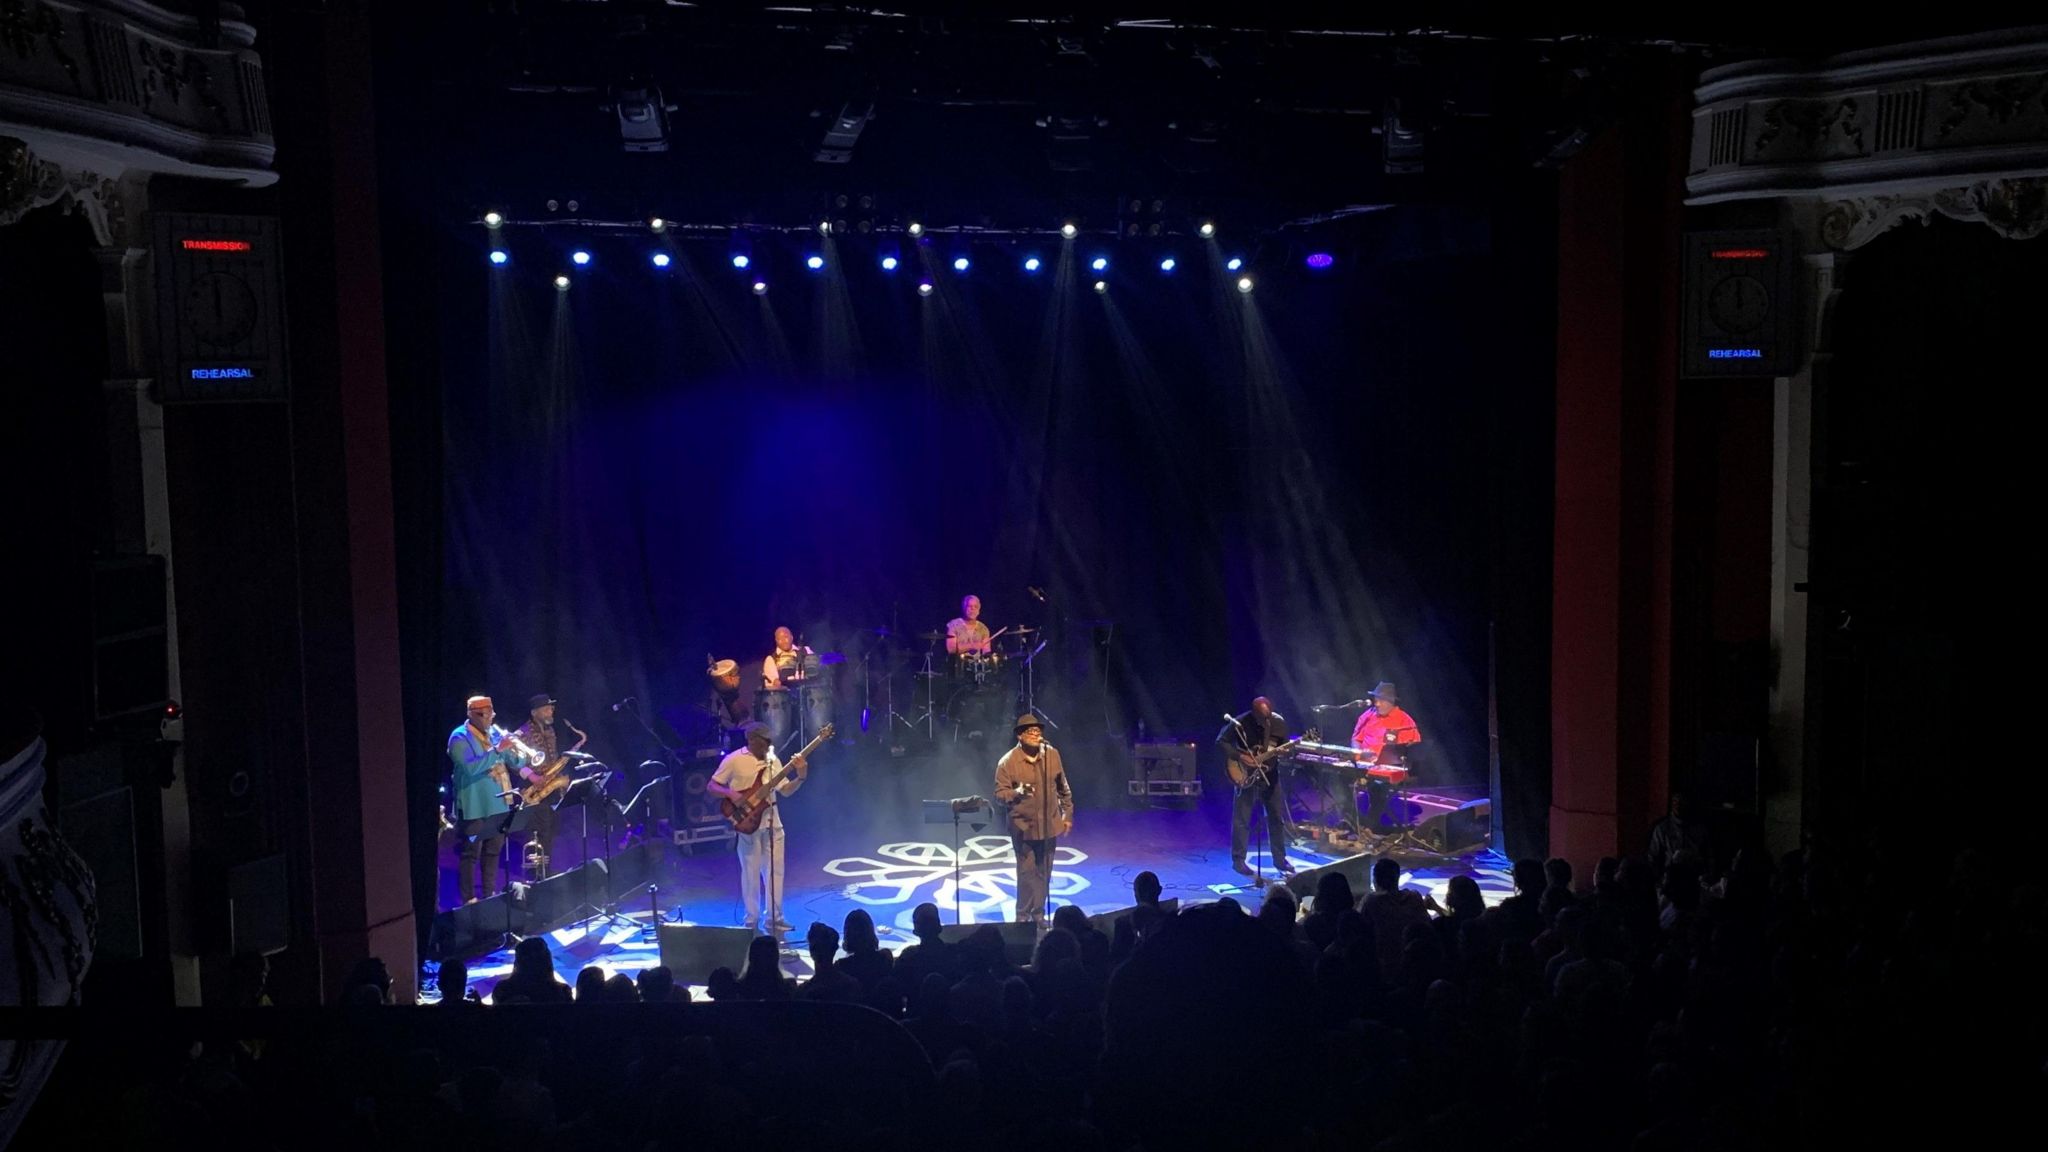 A band of nine members performs on stage inside O2 Shepherd's Bush Empire